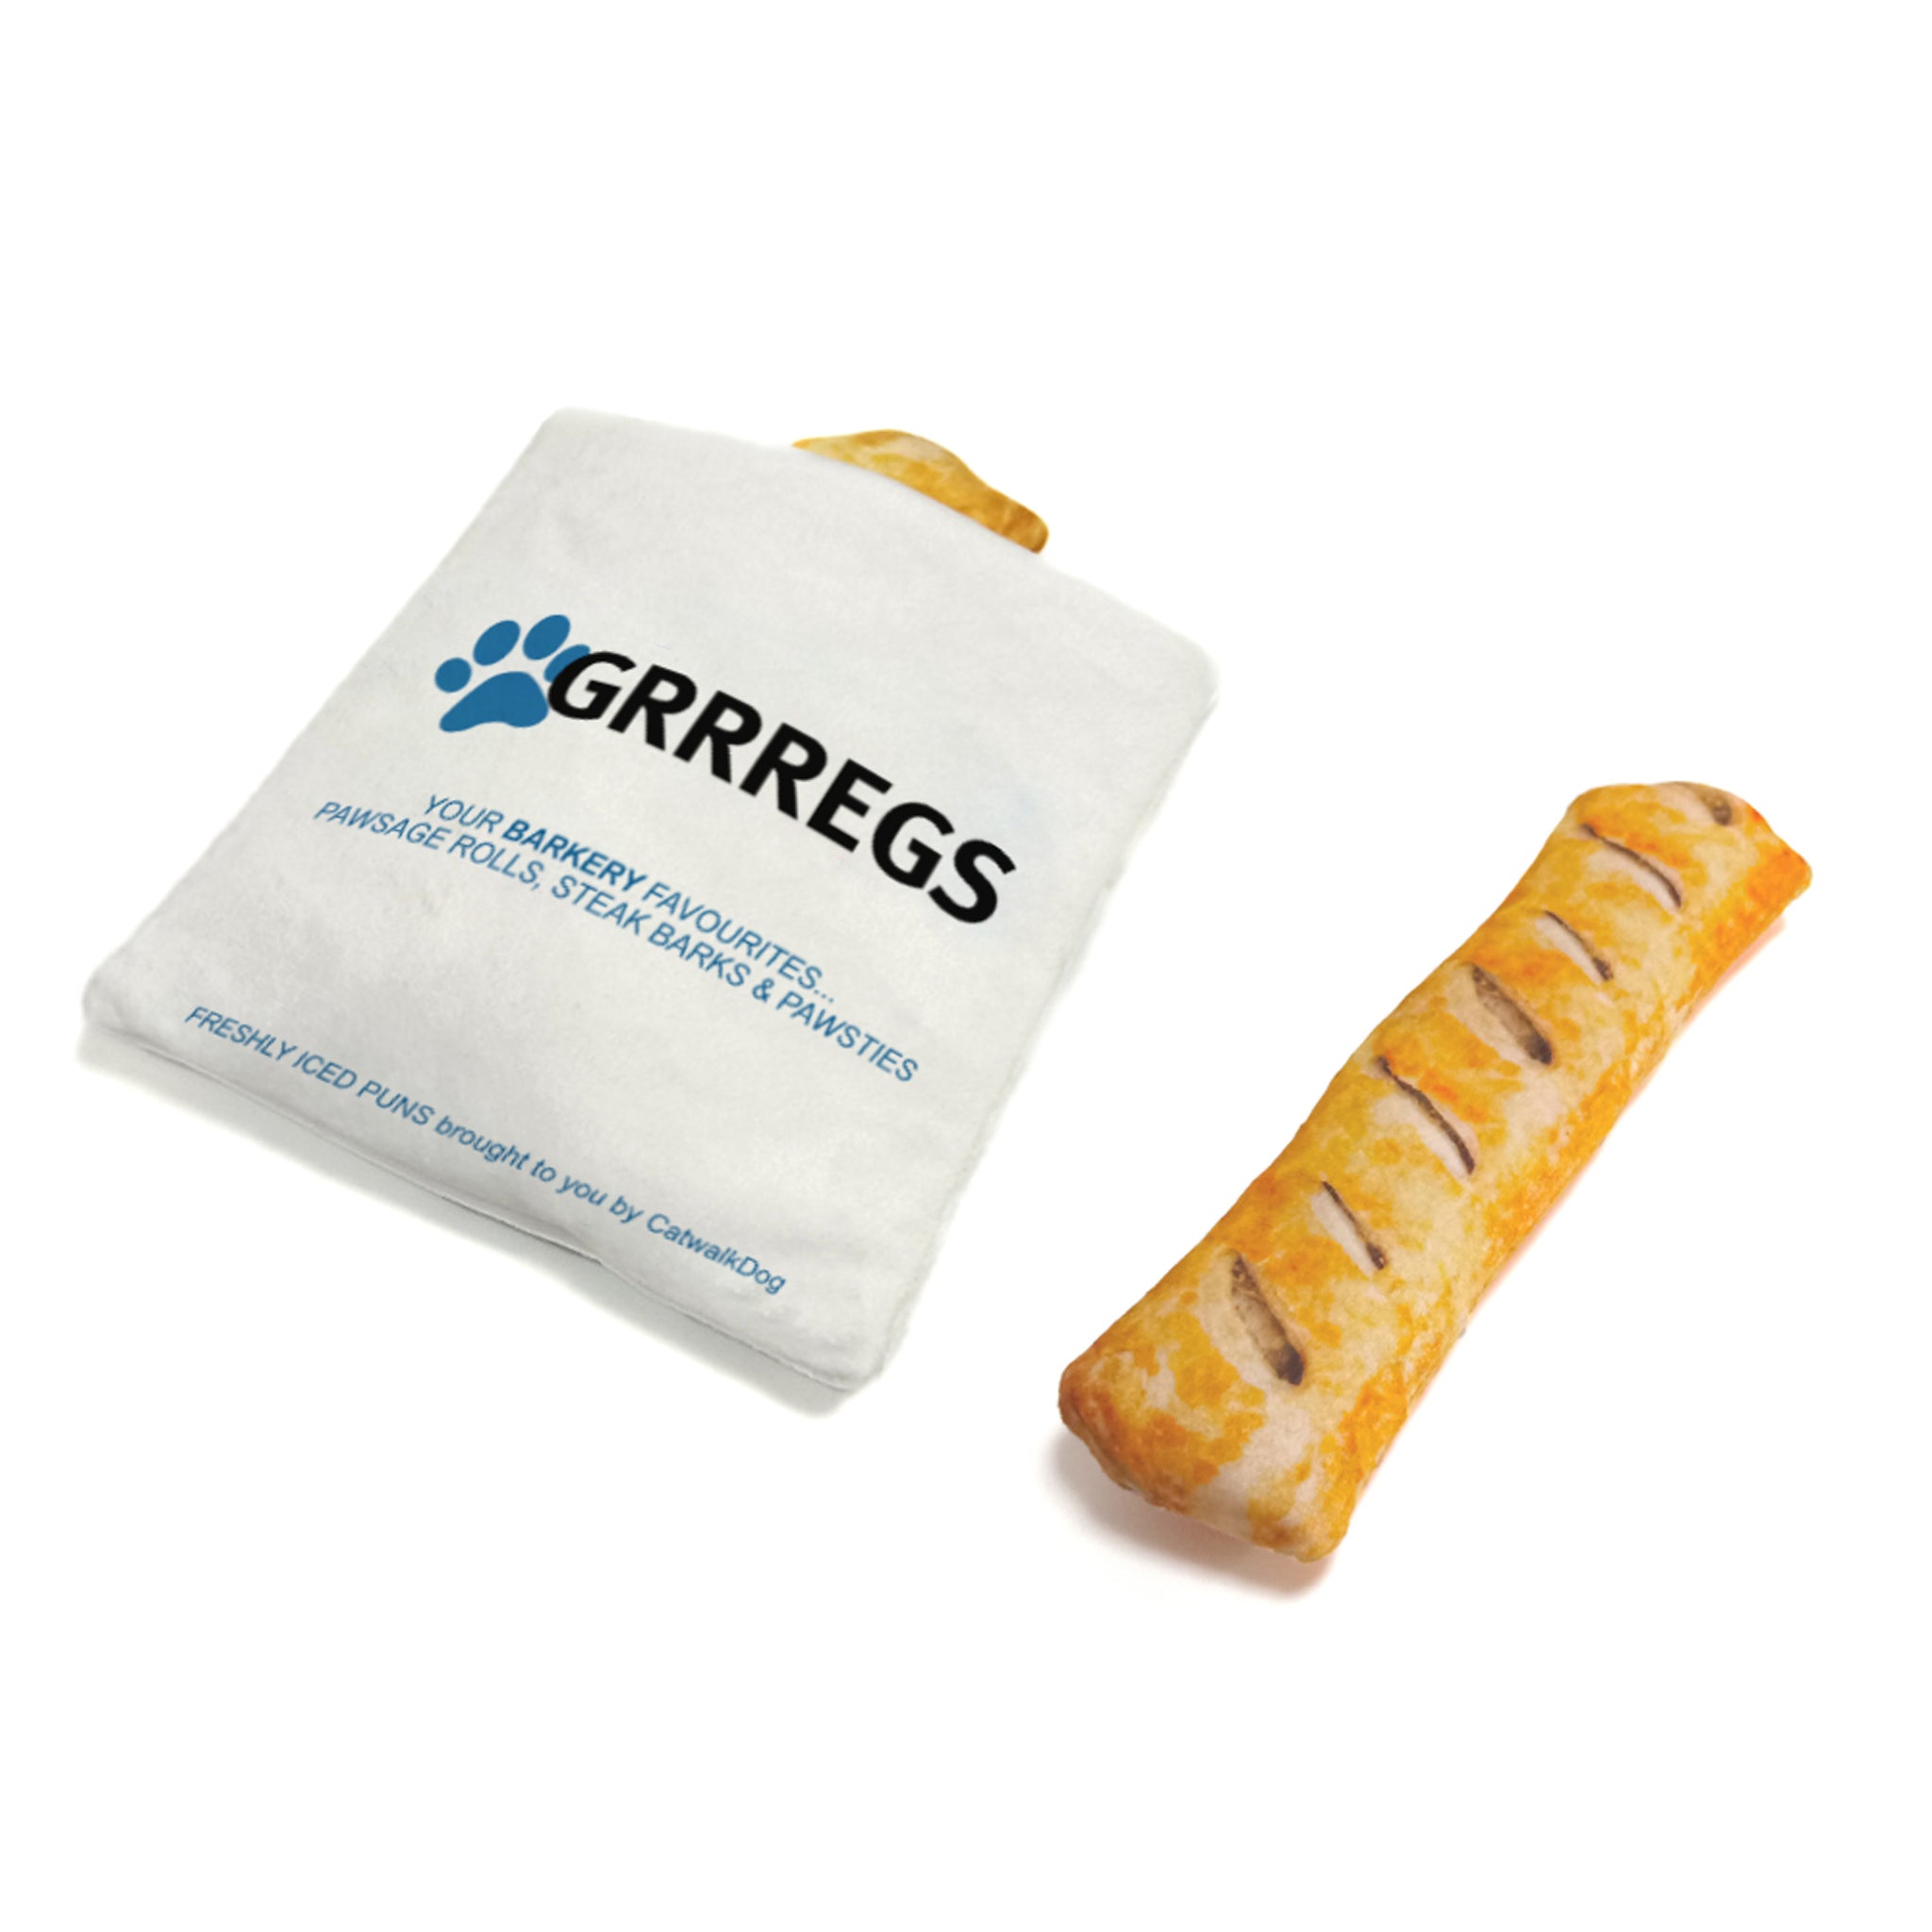 Grrregs Sausage Roll & Bag - Plush Dog Toy – Five And Dime